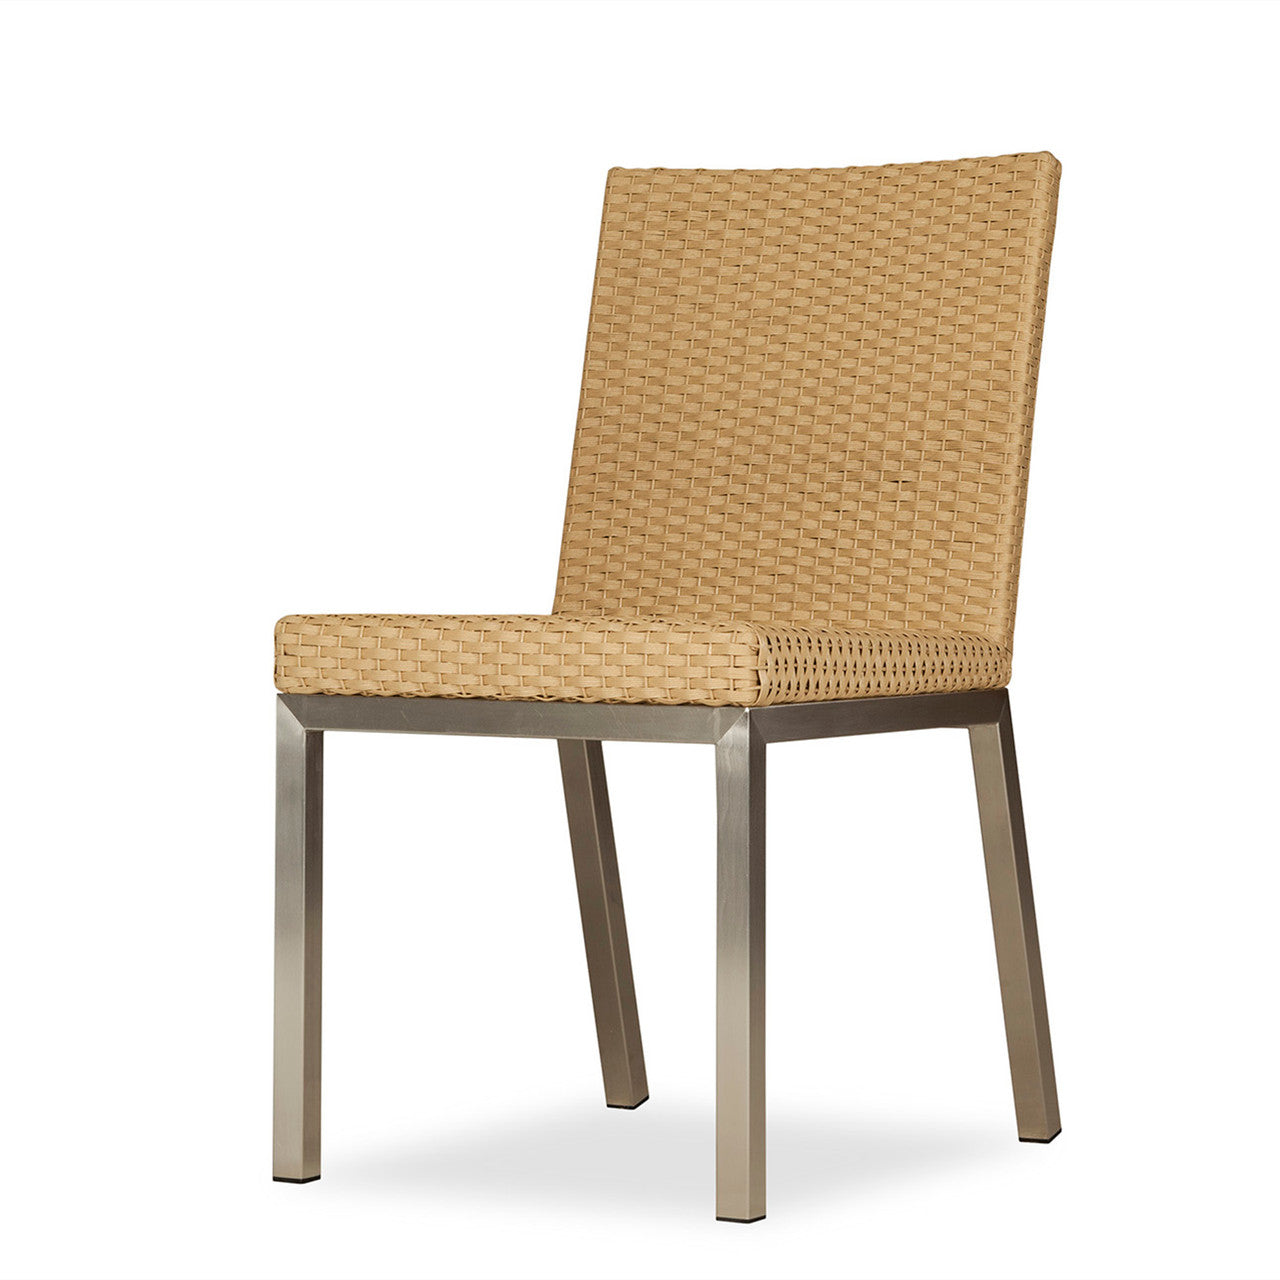 Lloyd Flanders Elements Wicker Armless Dining Chair With Stainless Steel Base